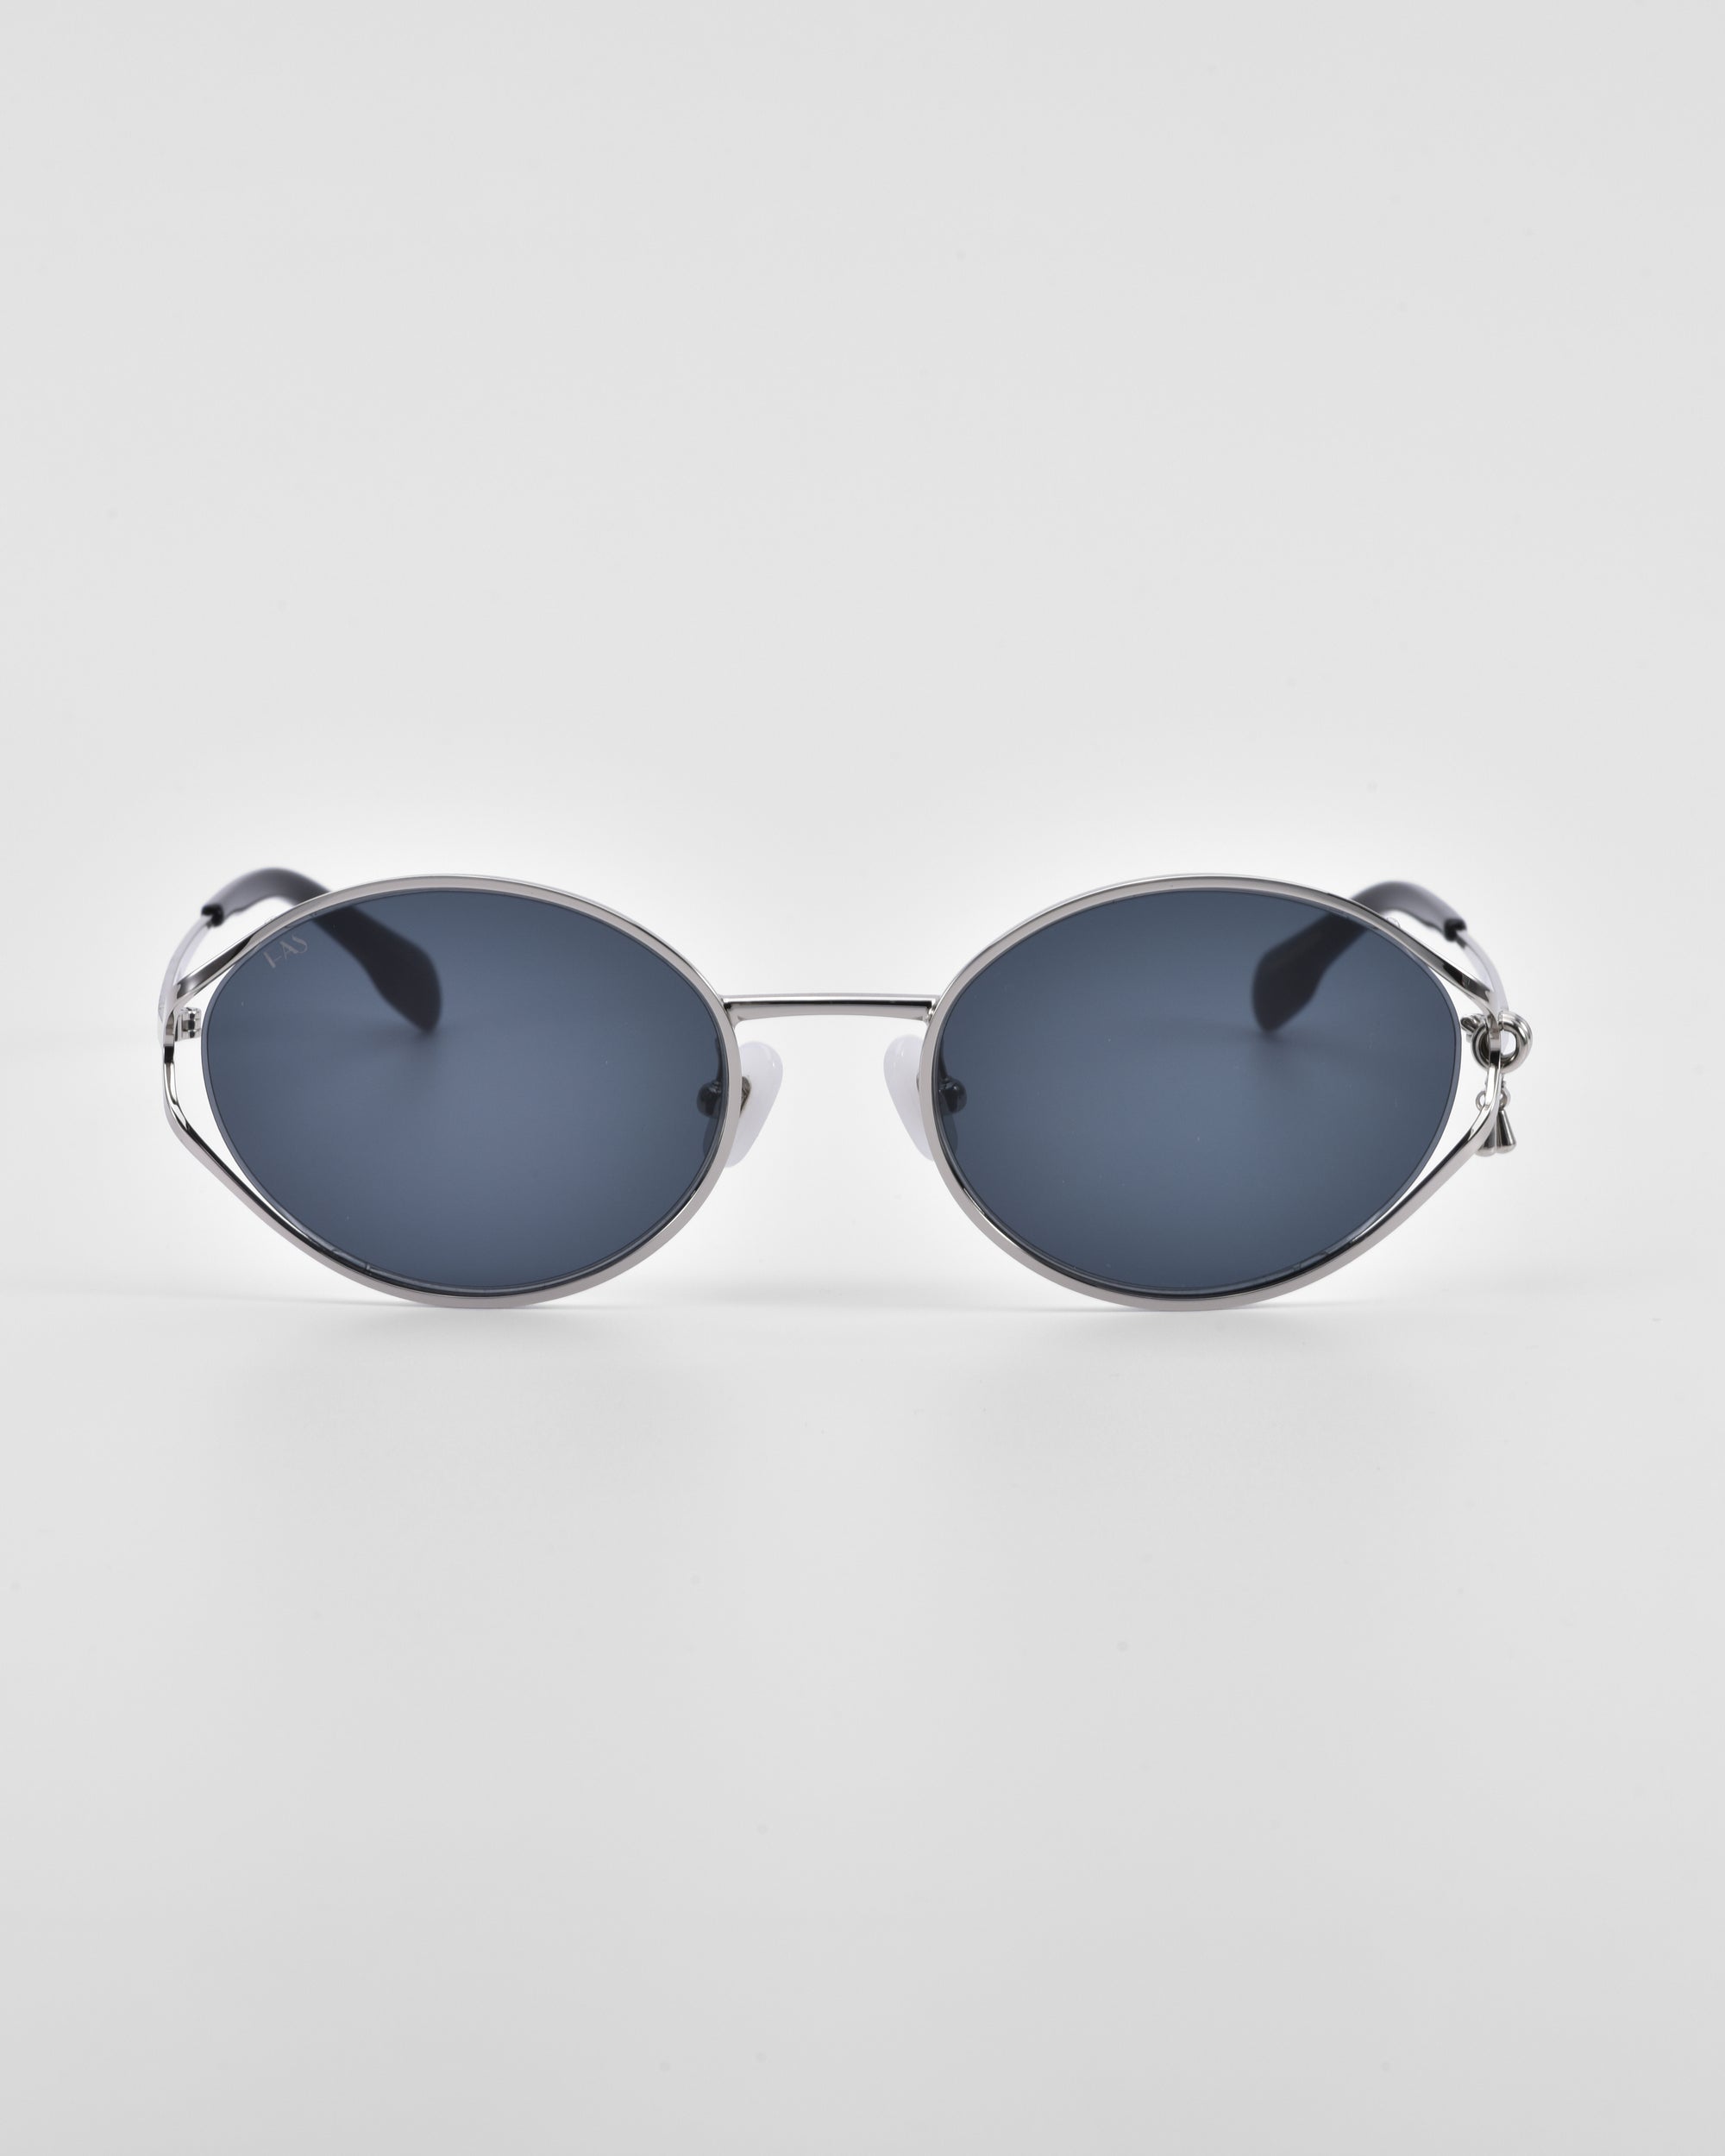 A pair of For Art's Sake® "Sky" sunglasses features oval-shaped, dark lenses set in a sleek silver frame, centered against a plain white background. The reflective lenses are complemented by thin, minimalist temples and natural jade-stone nose pads for added comfort and elegance.